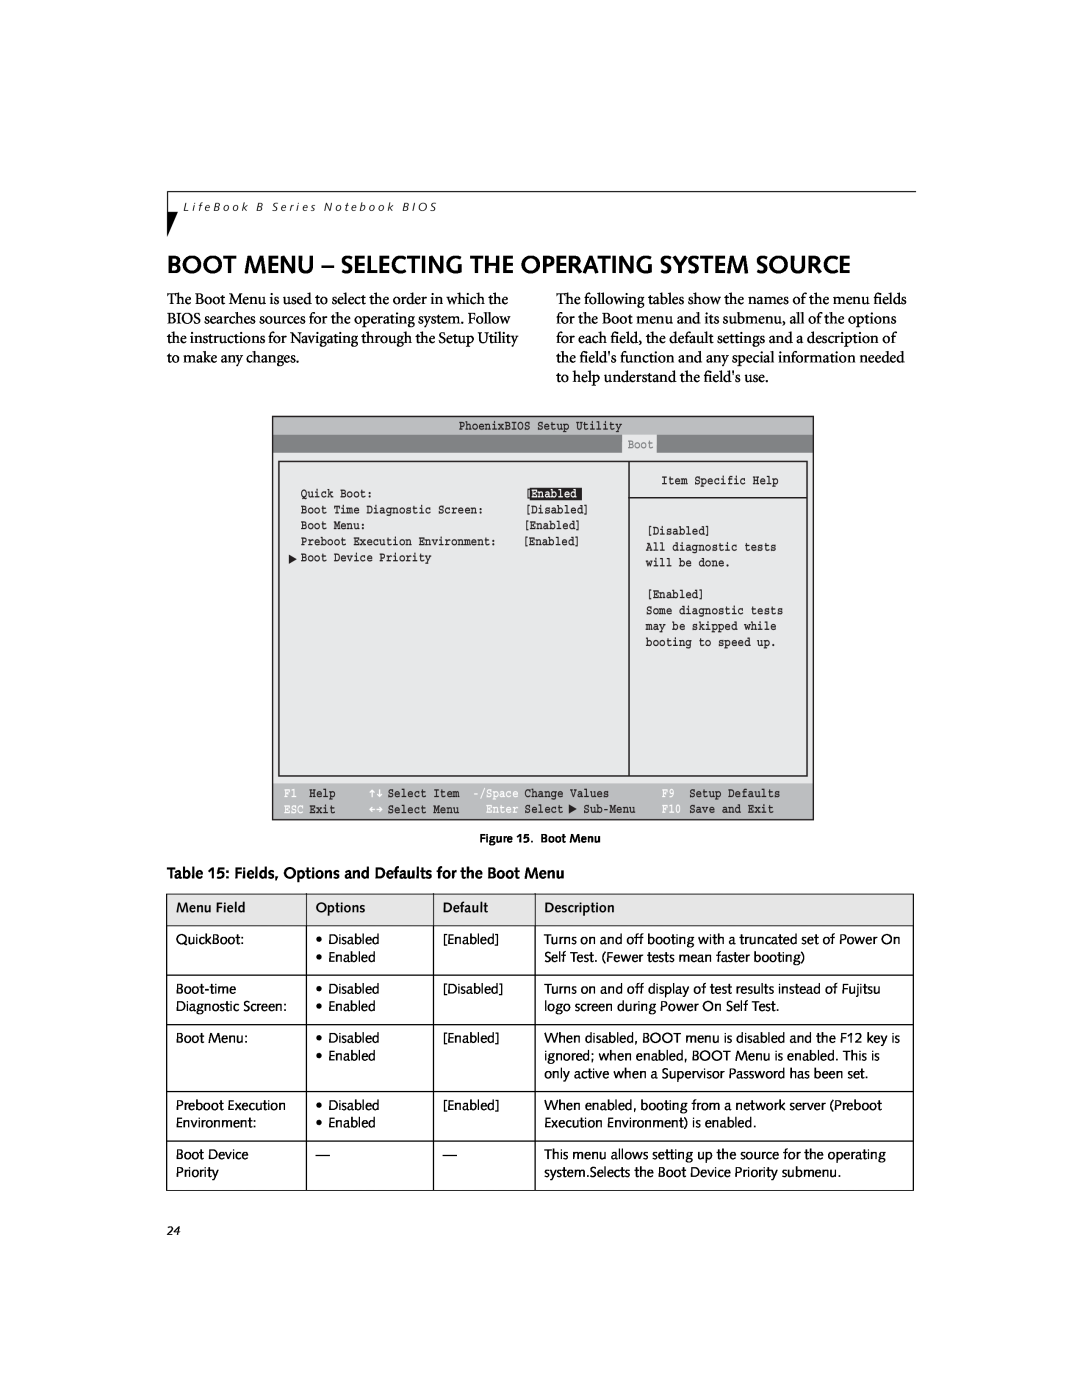 Fujitsu B6210 manual Boot Menu - Selecting The Operating System Source, Fields, Options and Defaults for the Boot Menu 